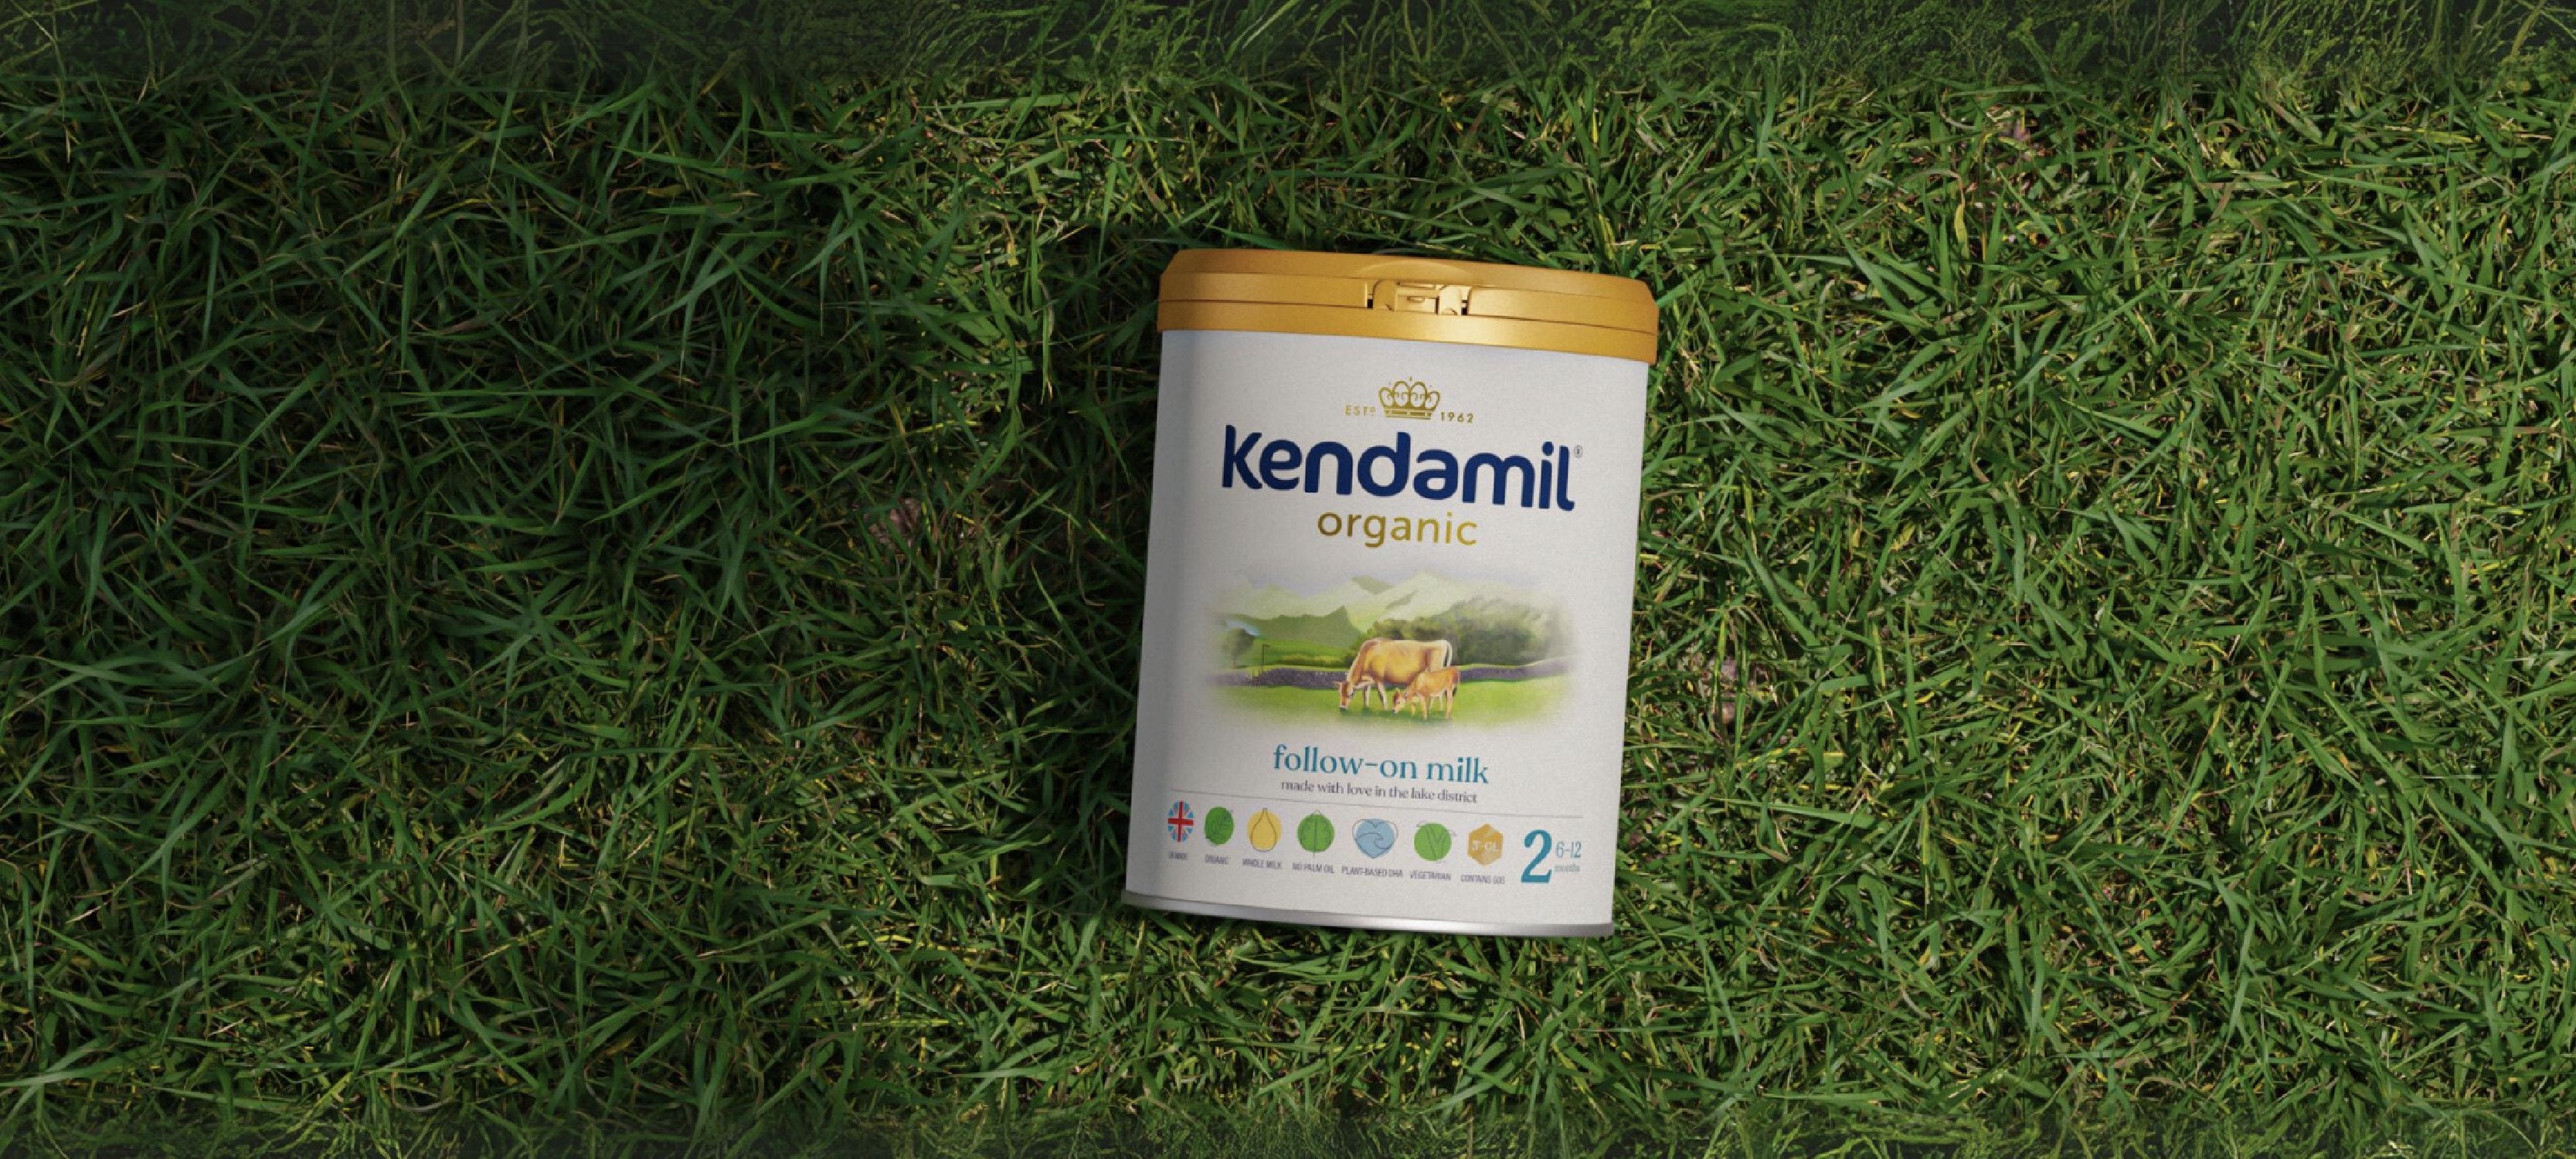 Baby's hand - Kendamil Organic Baby formula collection